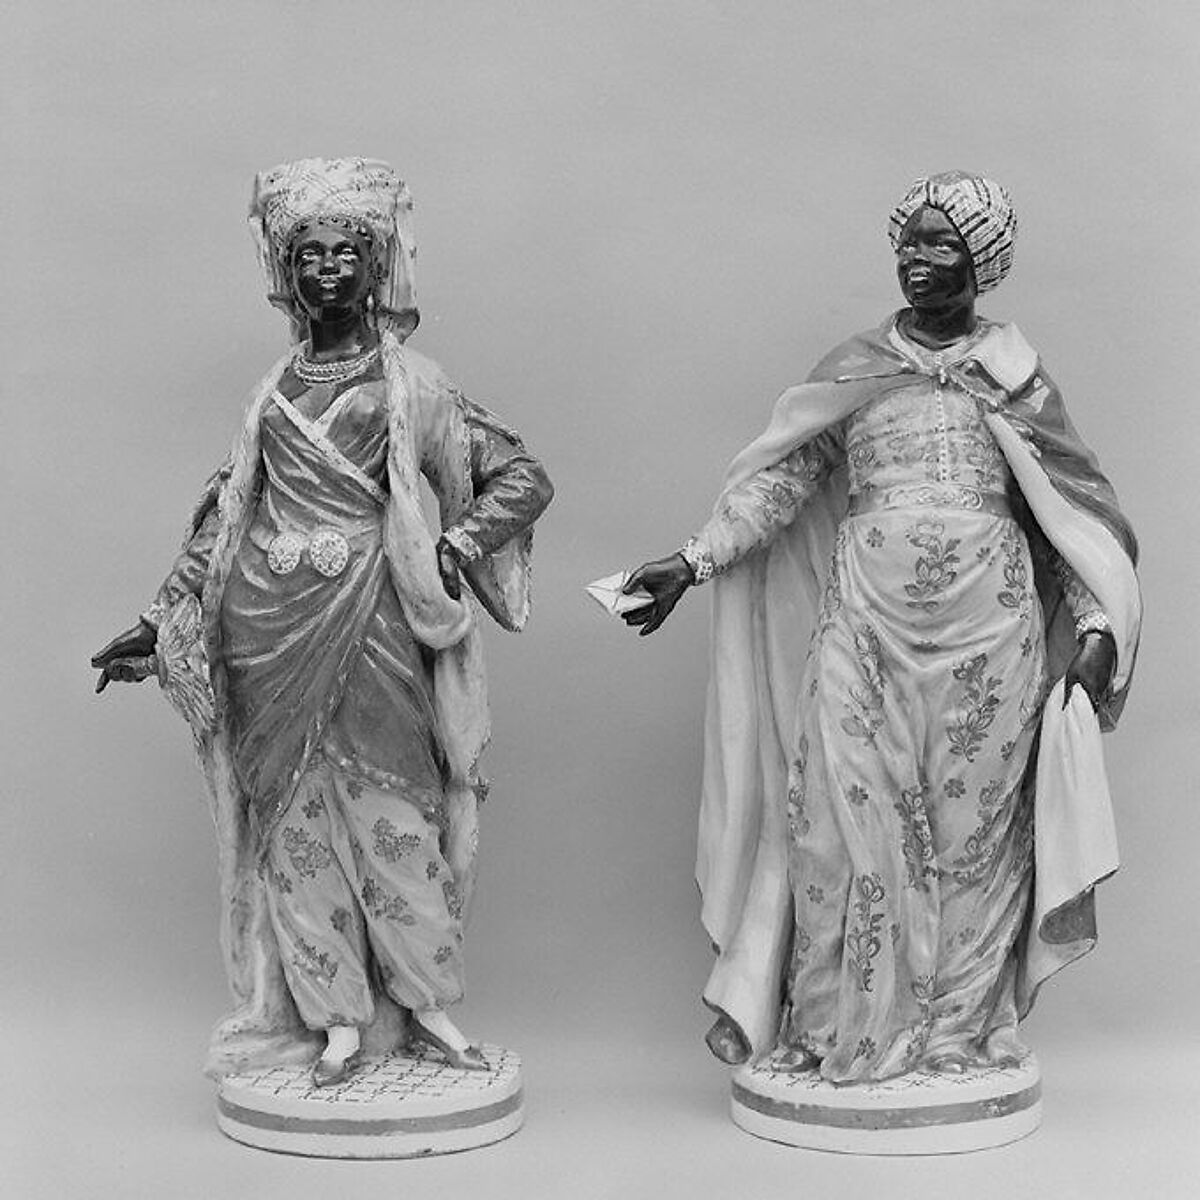 Moorish man and woman, Fontainebleau (Manufacture Royale, established 1530, 1535 or 1539), Hard-paste porcelain, French, Fontainebleau 